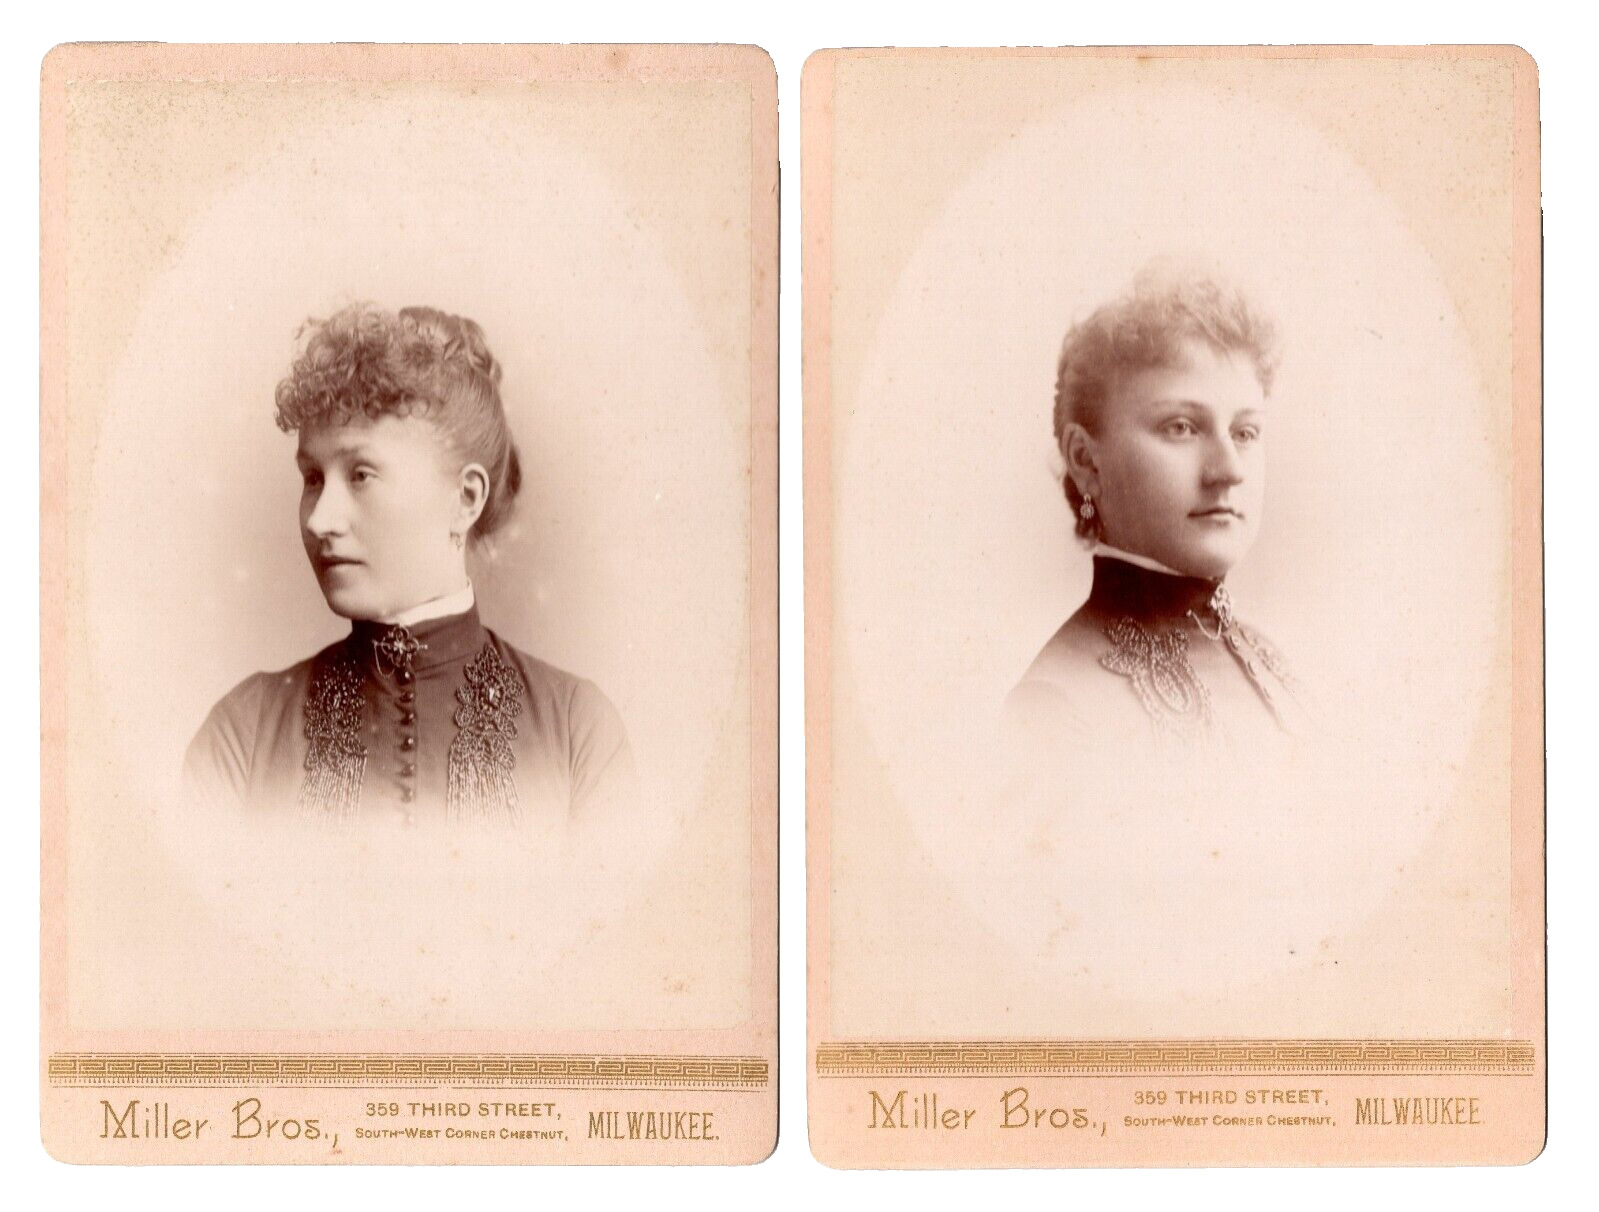 MILWAUKEE WIS 1880s TWO Victorian SISTERS Peach Cabinet Cards by MILLER BROS.